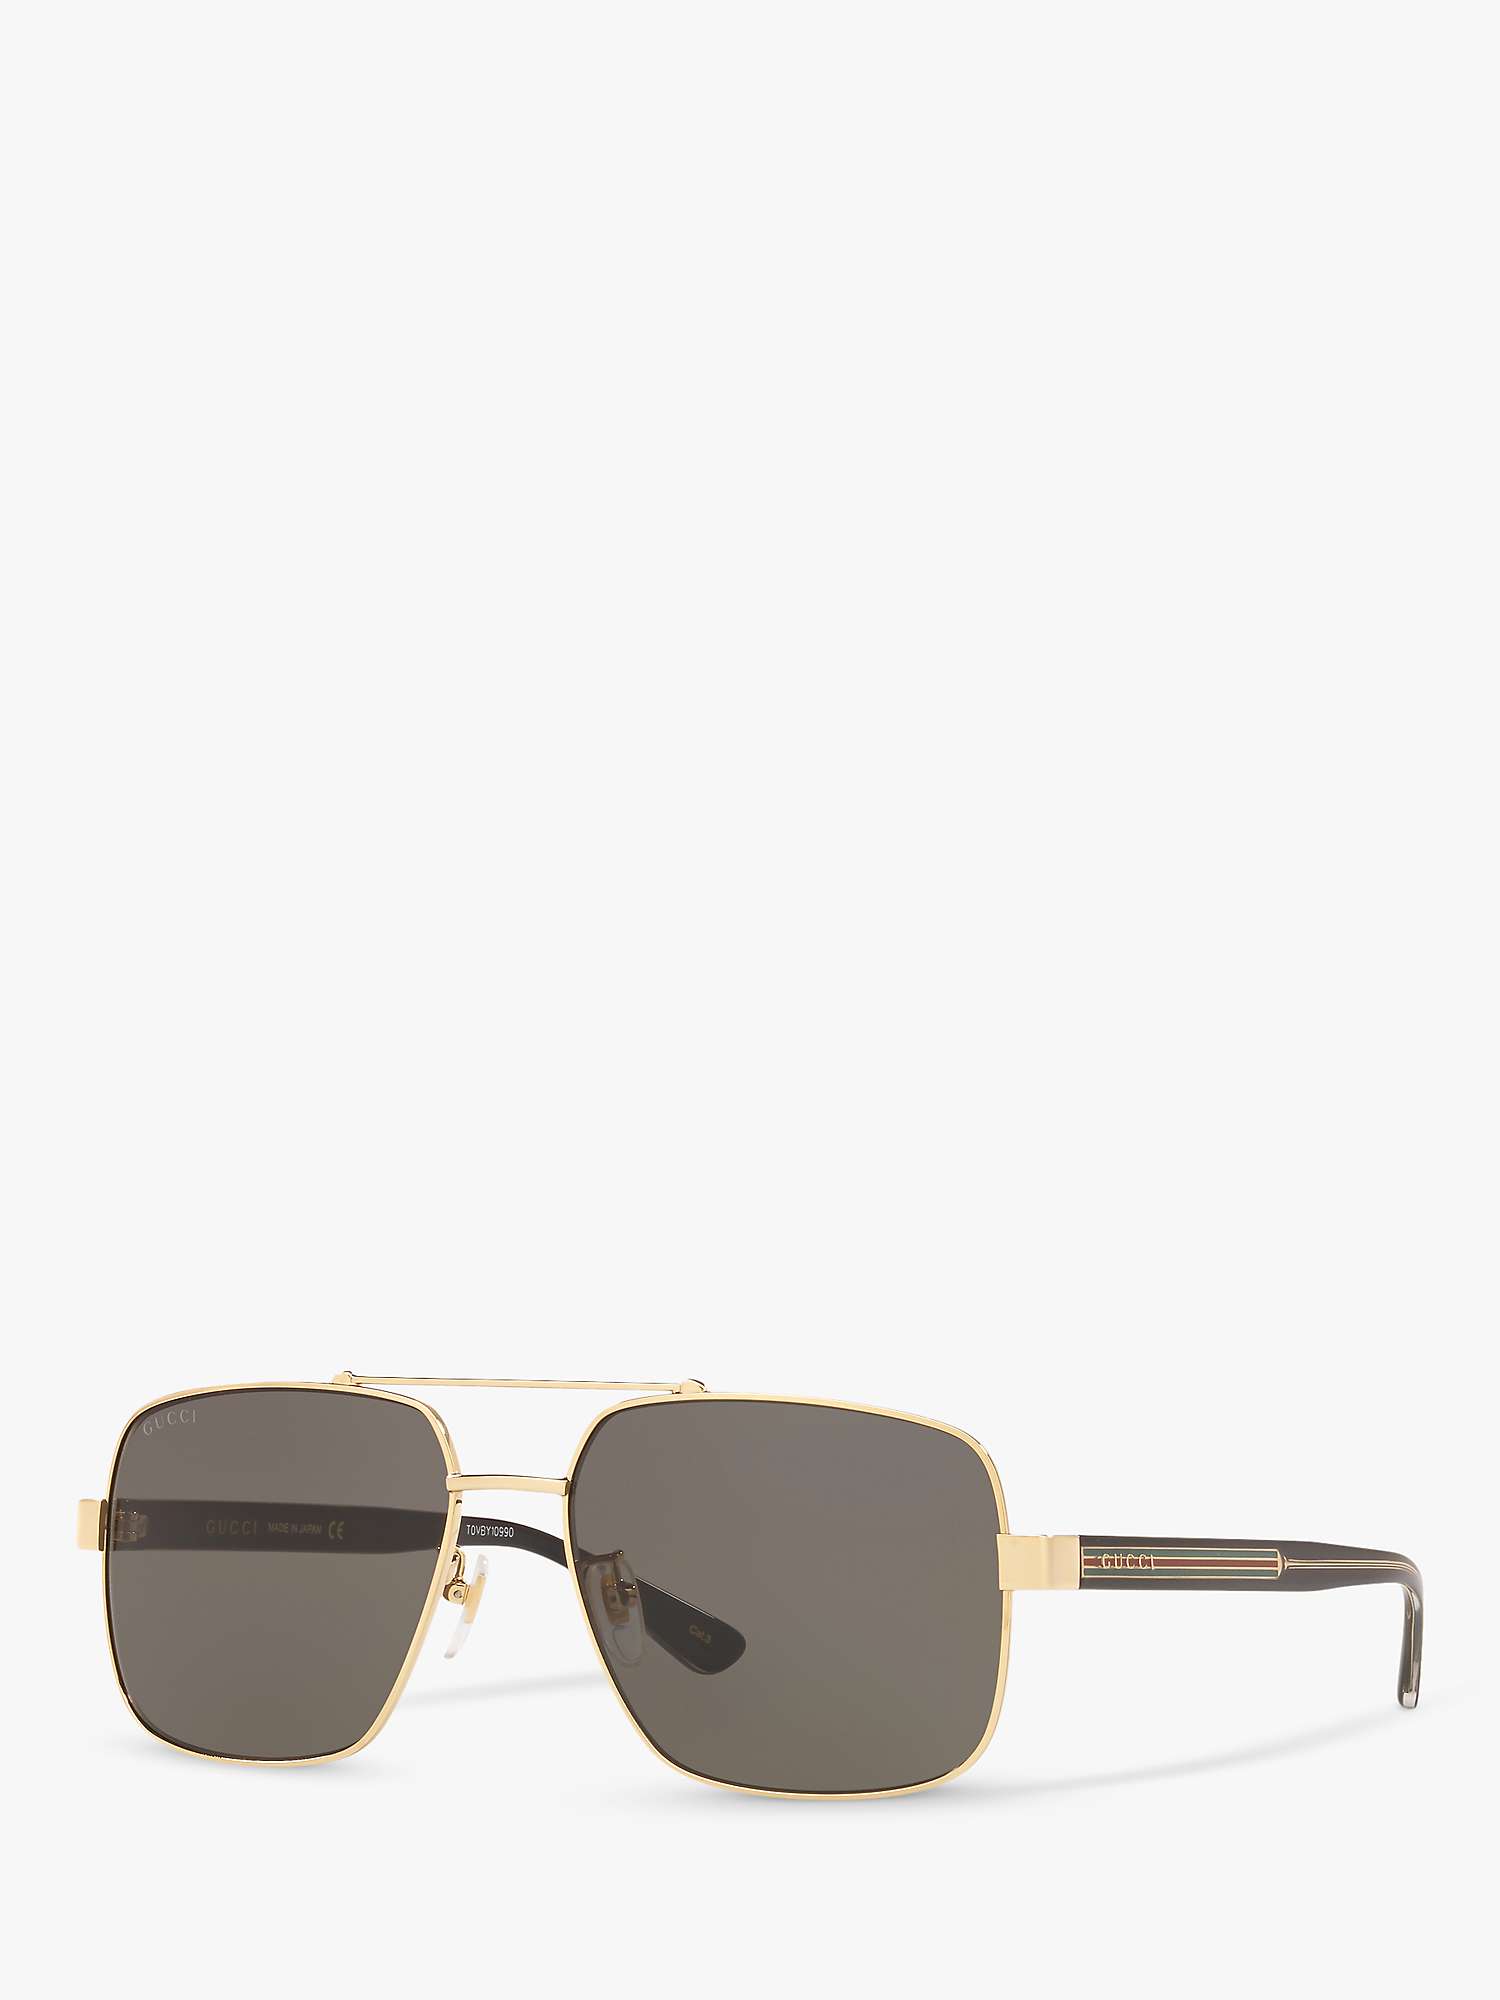 Buy Gucci GG0529S Men's Square Sunglasses, Gold/Grey Online at johnlewis.com